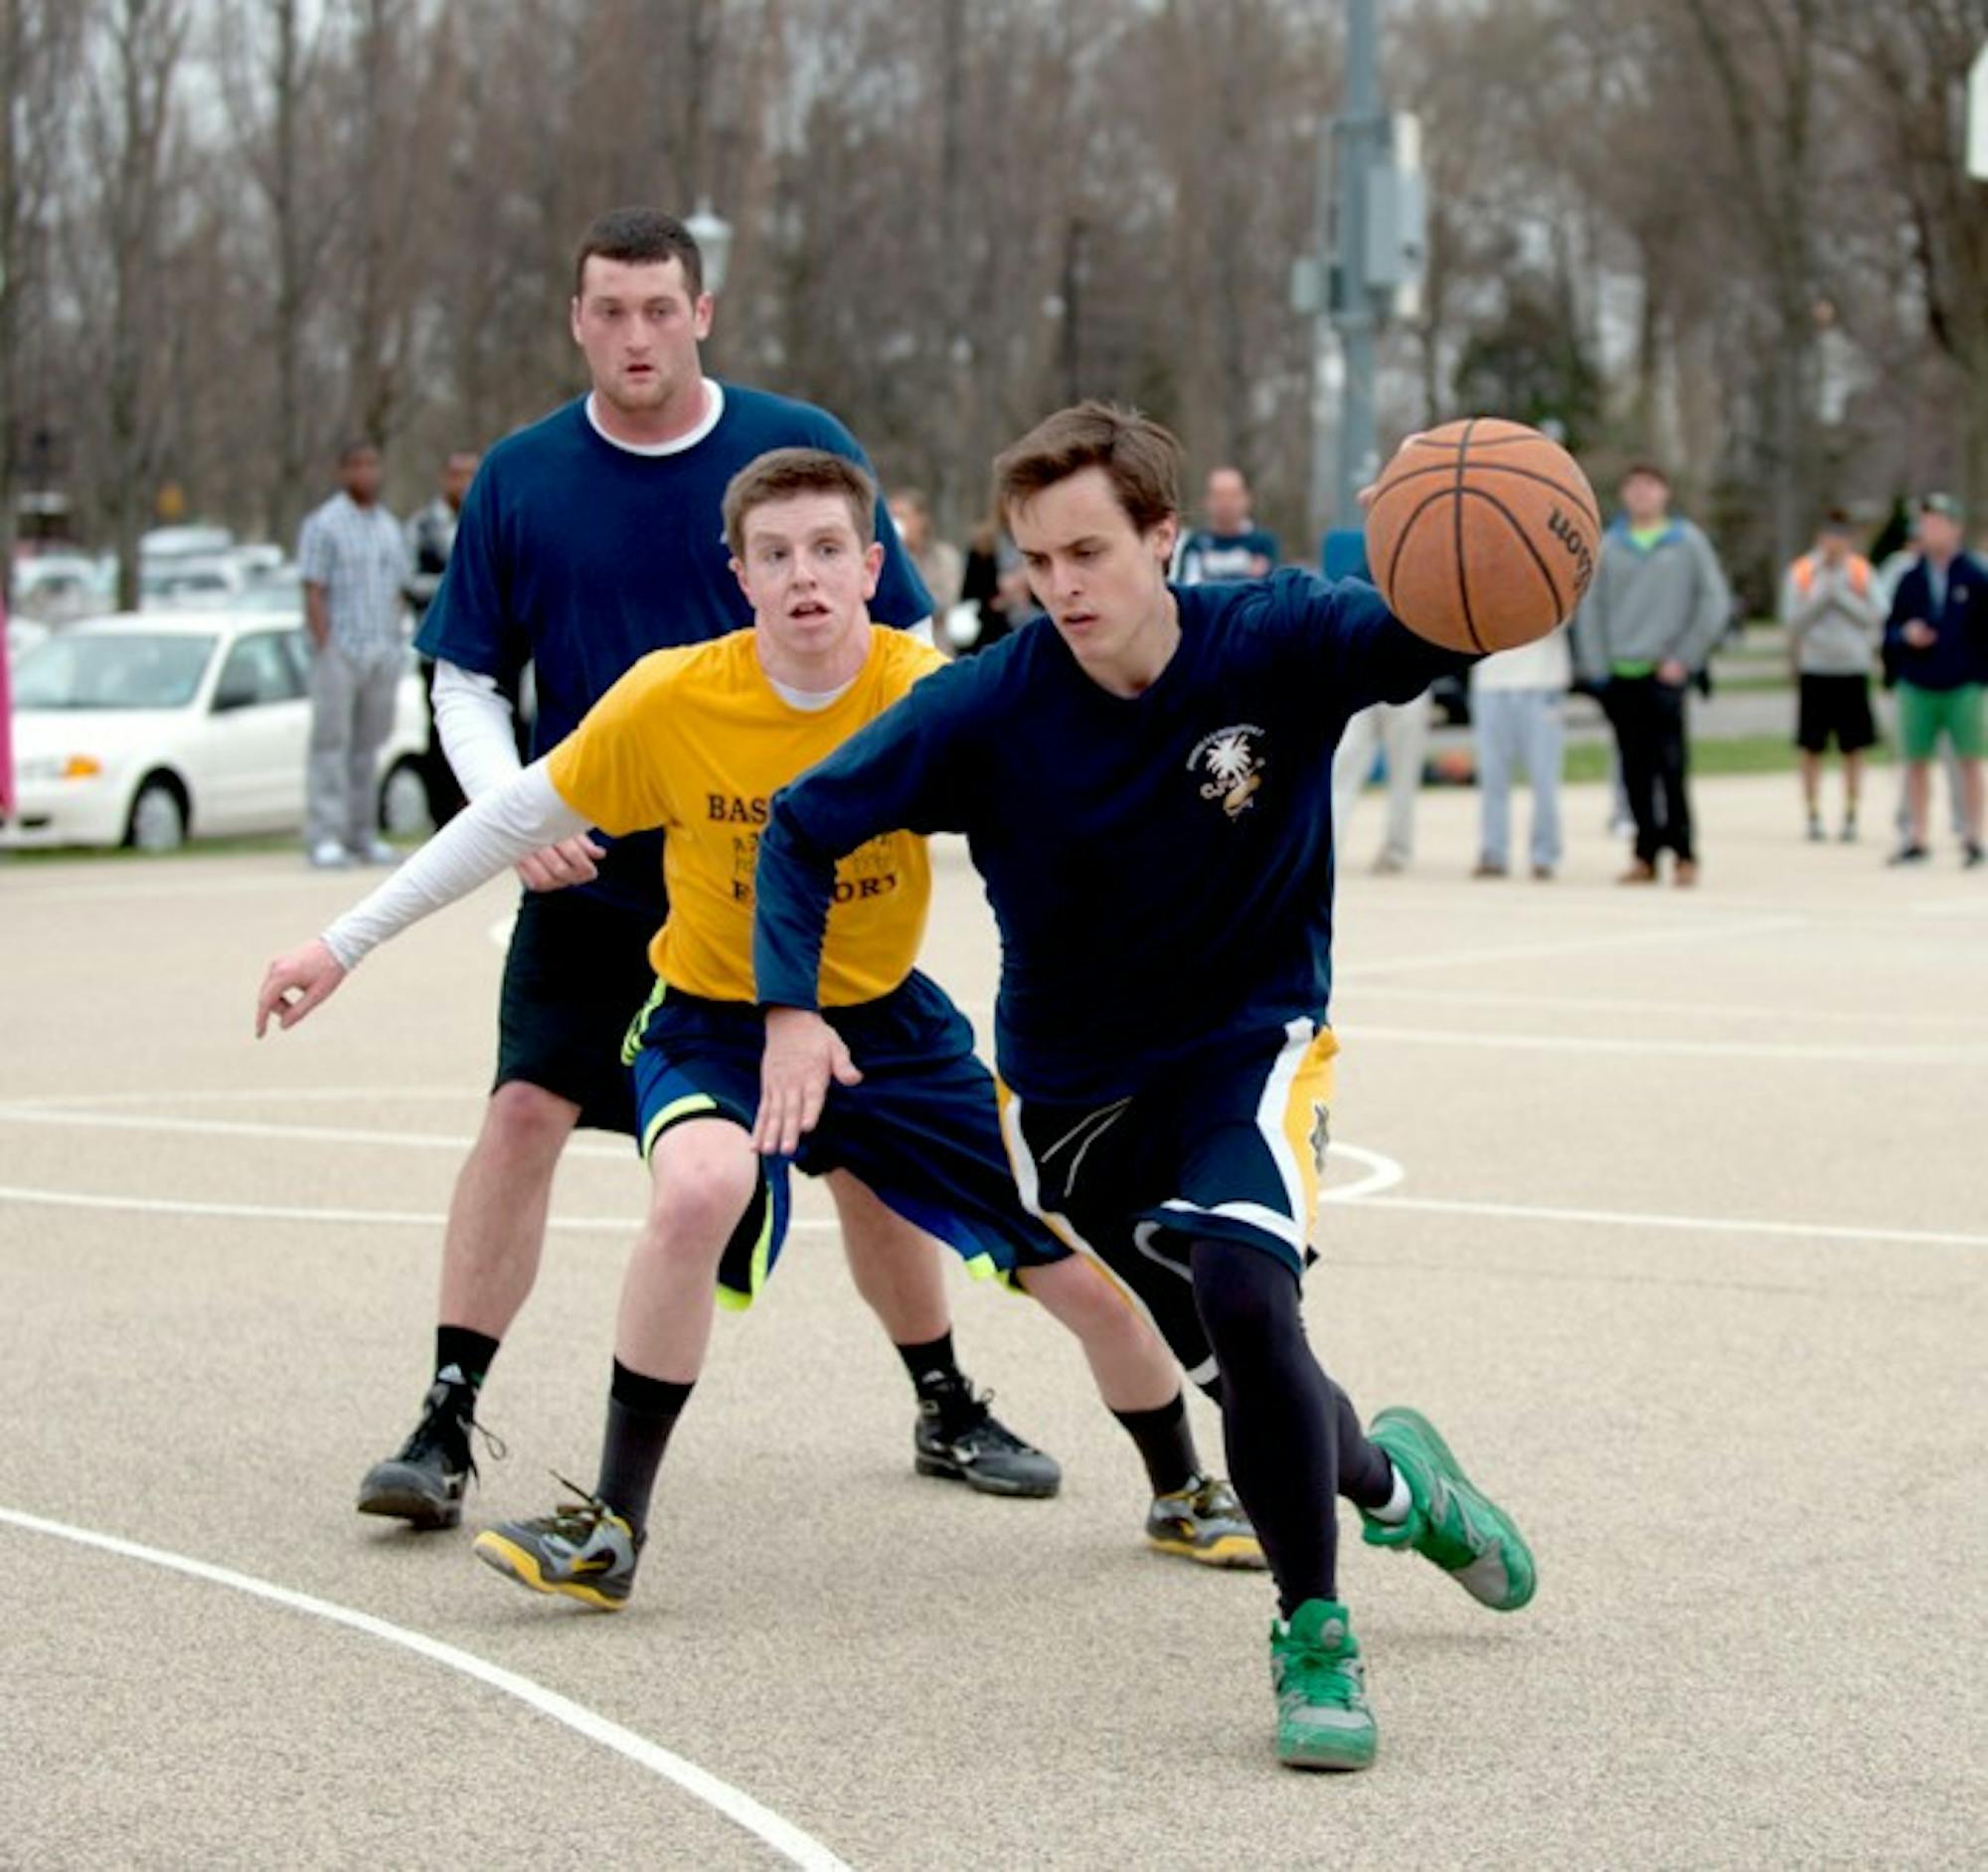 Members of CJ's Party of Five and Touchdown 3s battle during the Elite Eight of Bookstore Basketball. Touchdown 3s won the game, 21-12, and advanced to the Final Four.